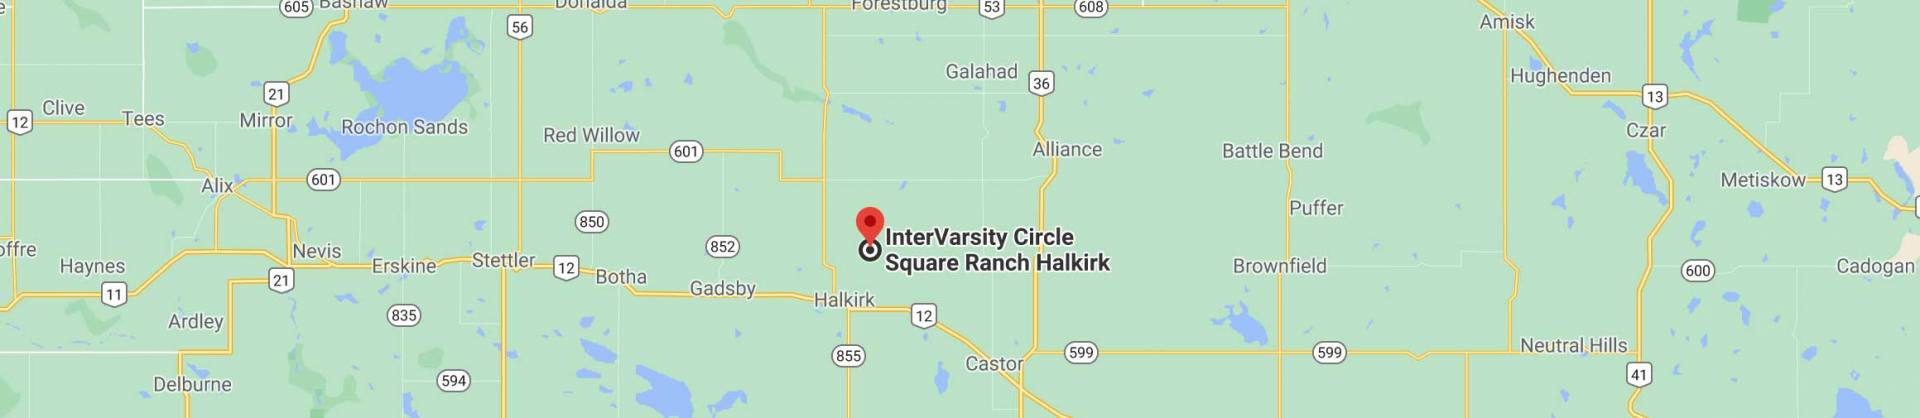 Circle Square Ranch Halkirk's location indicated on a map. Links to Google maps directions.